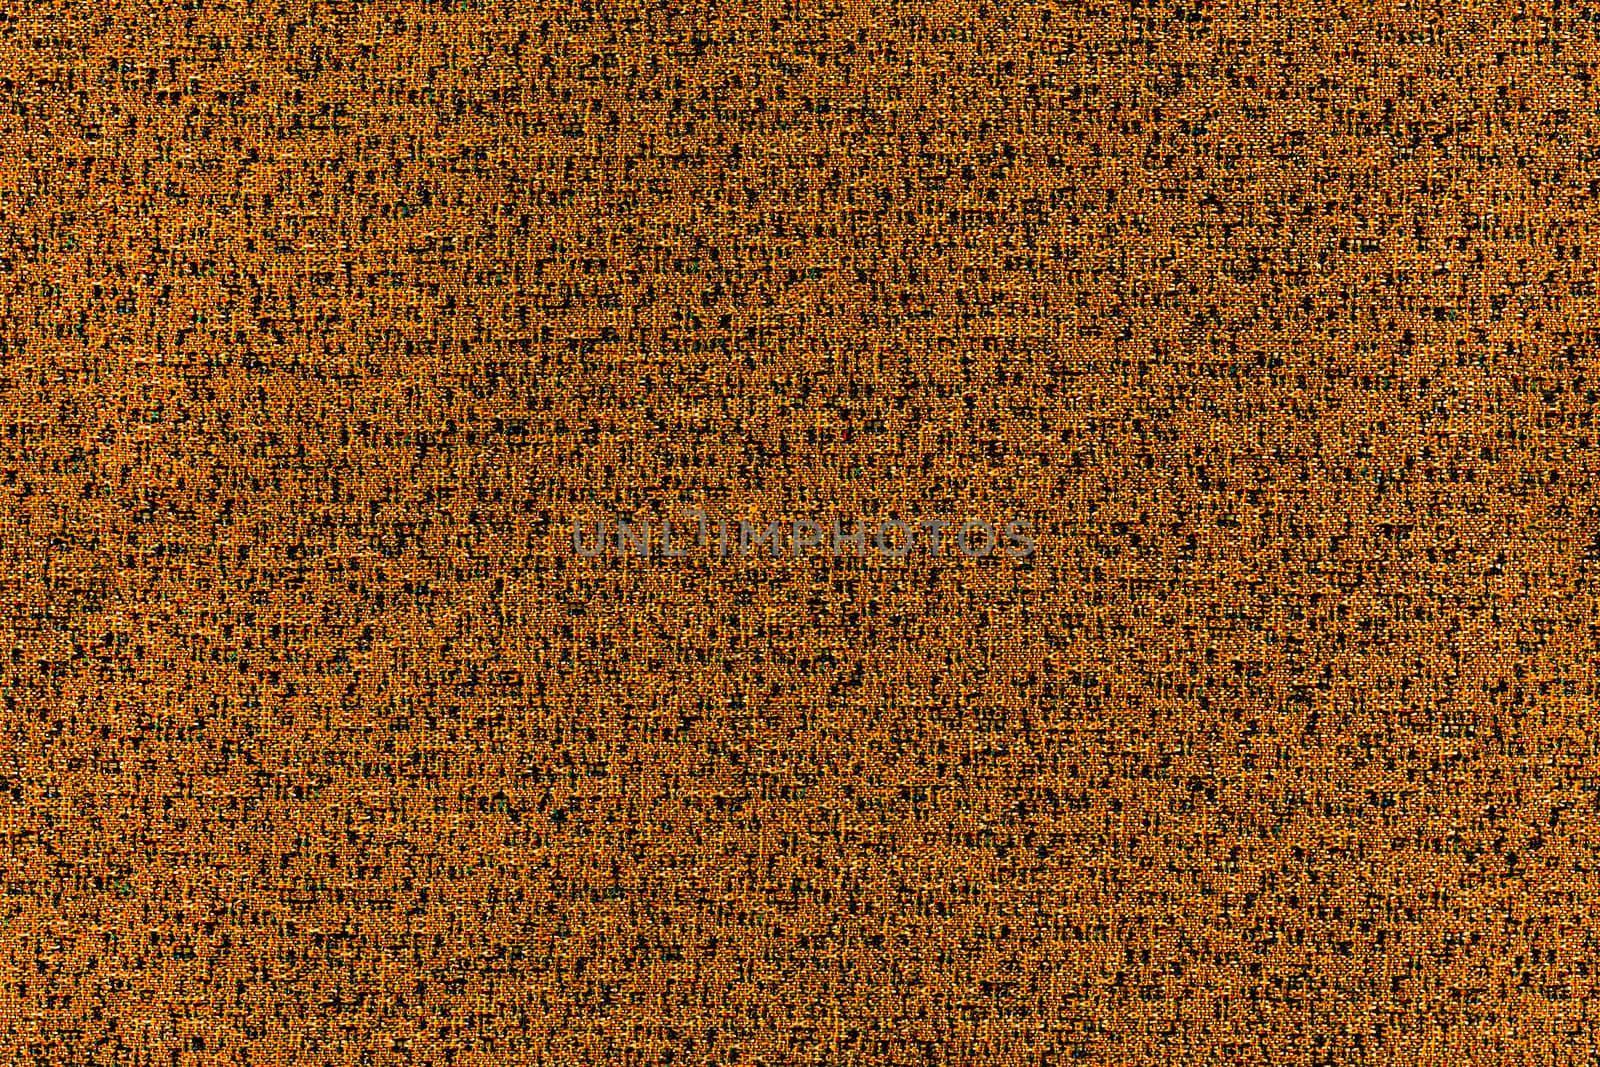 Seamless texture of flat orange synthetic furniture upholstery with motley fine details.